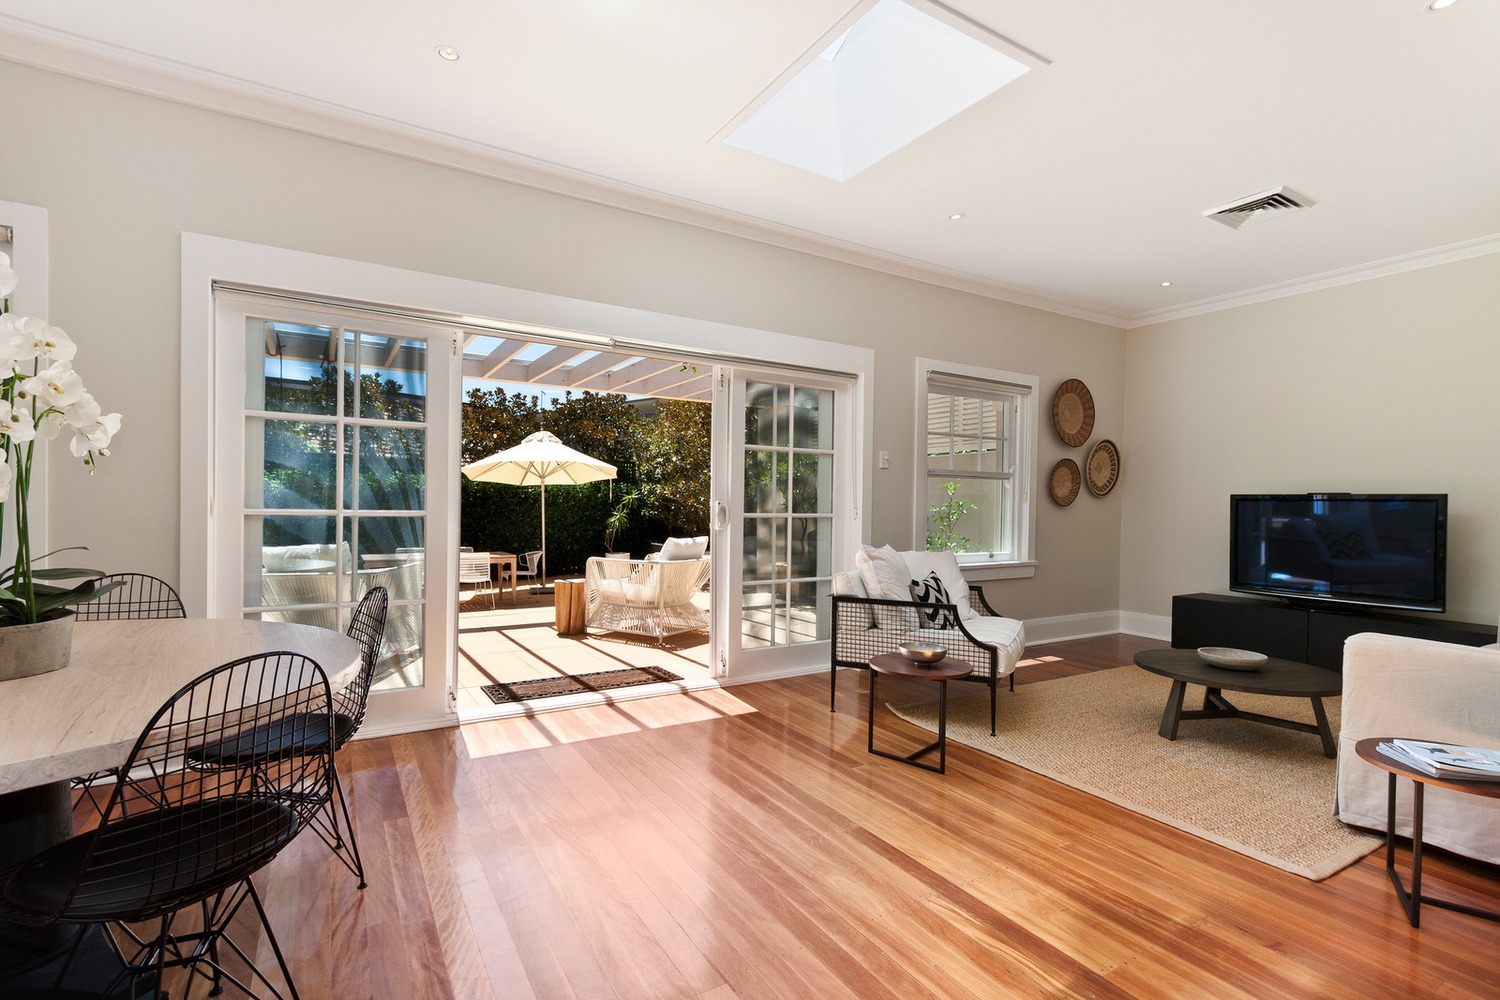 The living room's transformation during the home additions Golf project enhanced the home's appeal